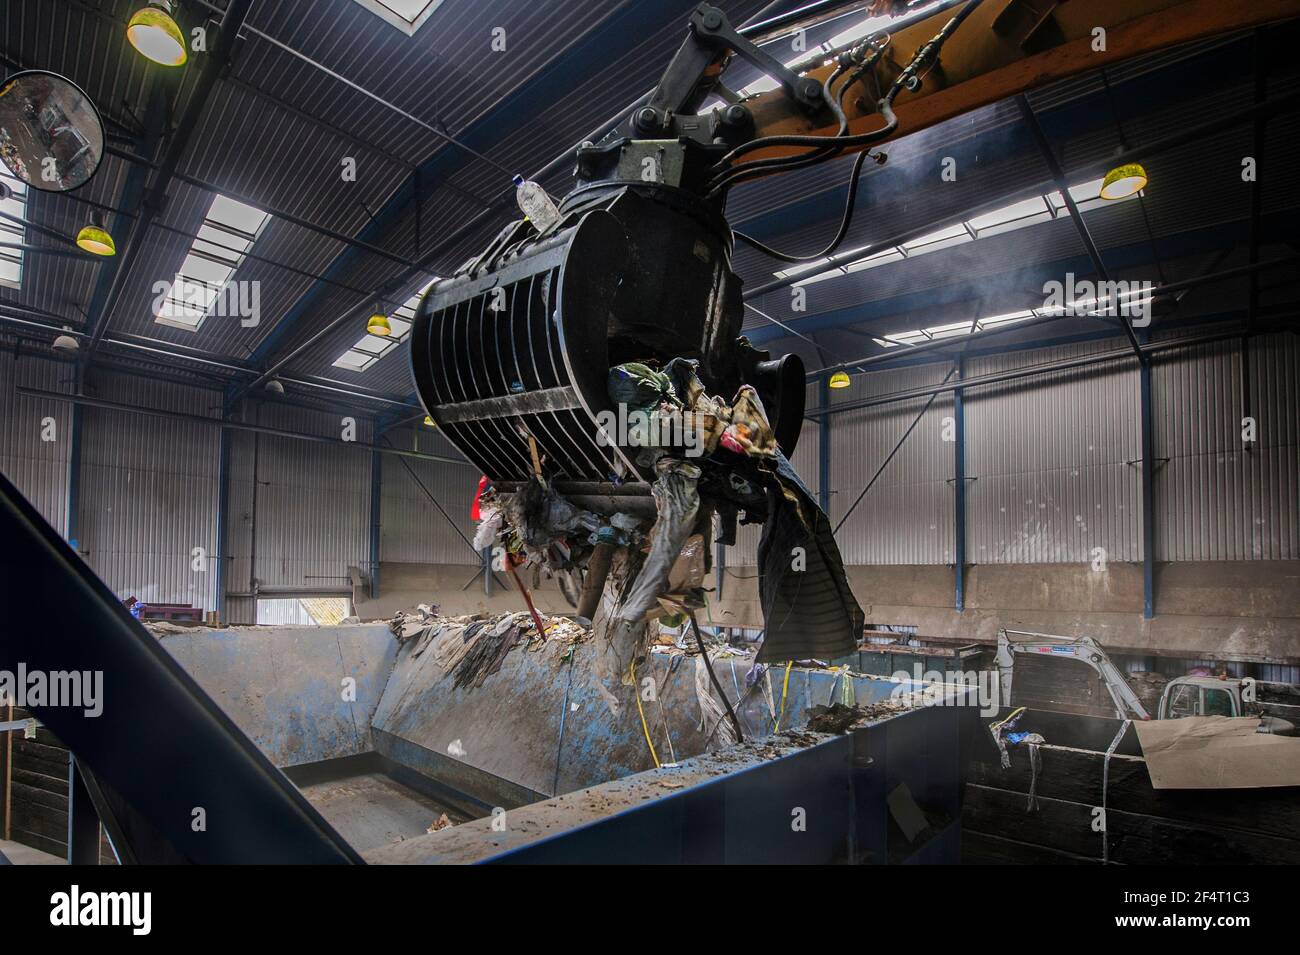 Mechanical grabber at work in a recycling plant in England. Stock Photo